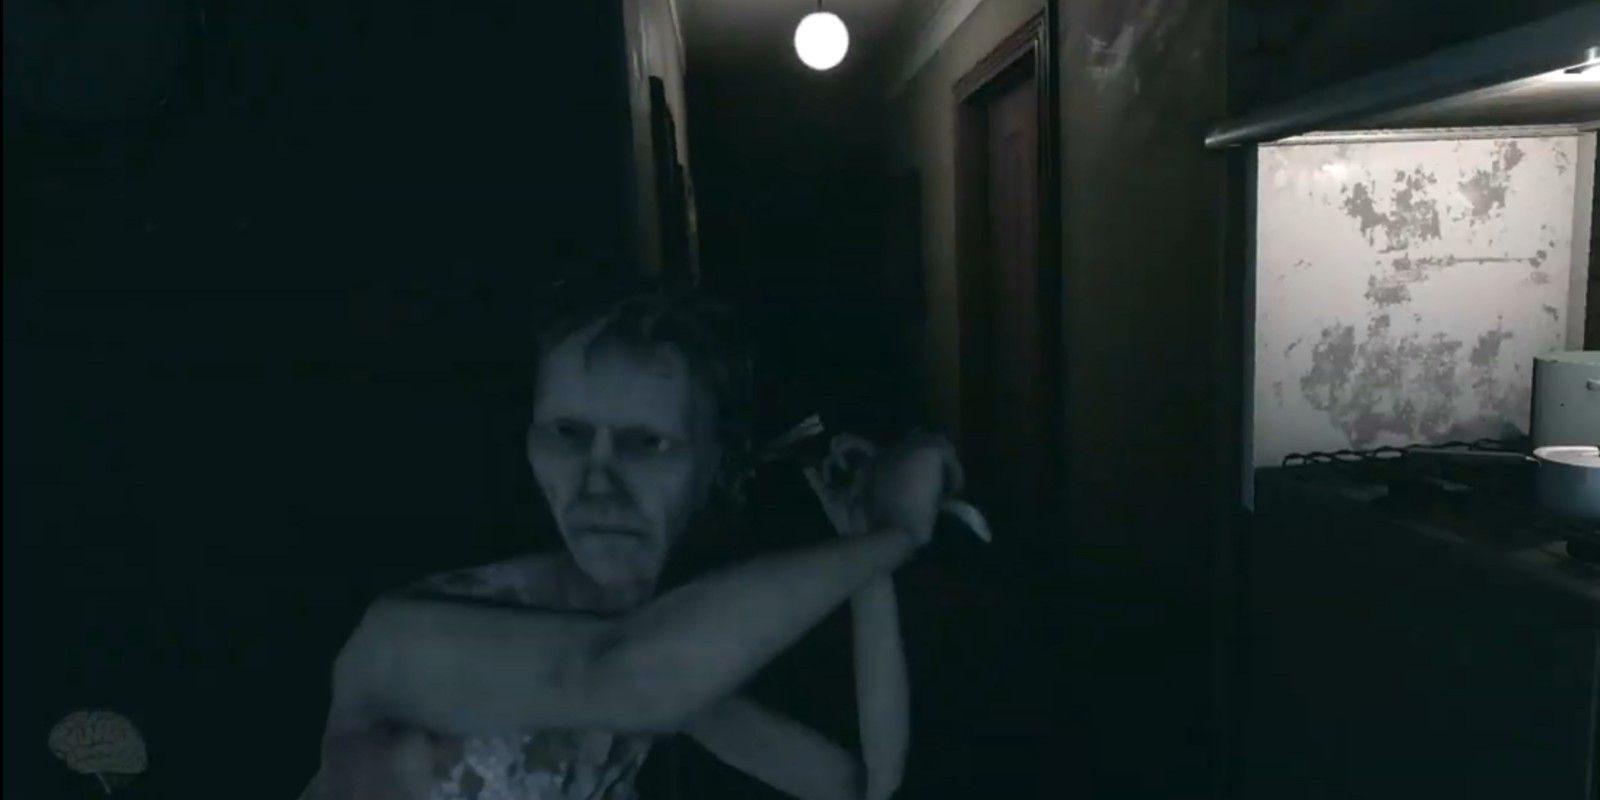 Dolores attacks the player in Visage chapter 2